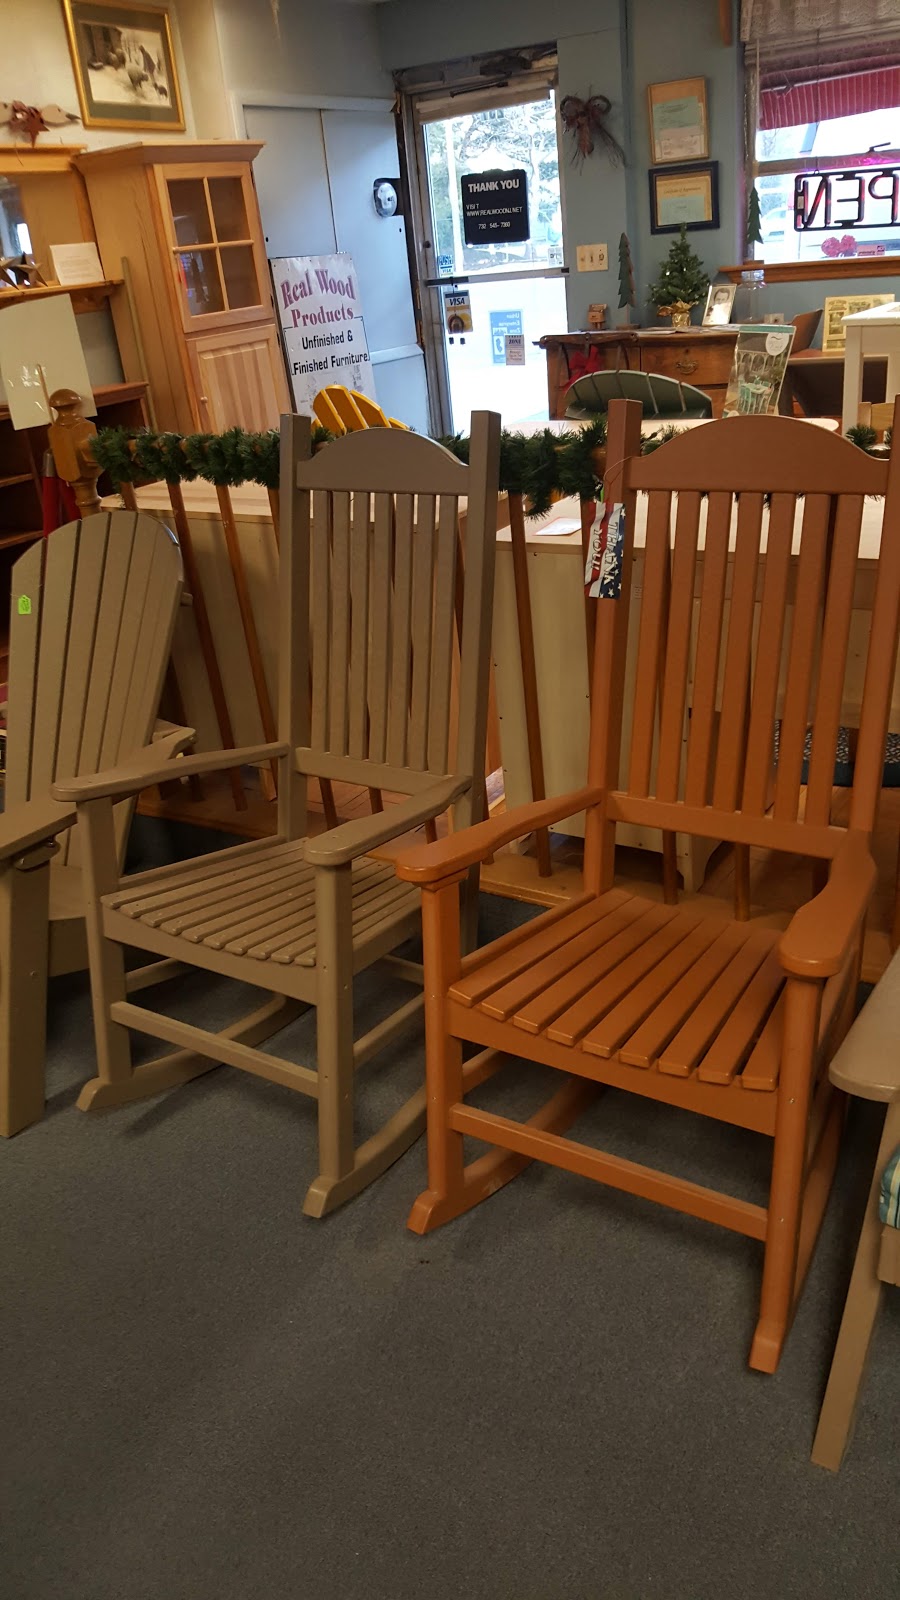 Real Wood Products | 257 Remsen Ave, New Brunswick, NJ 08901 | Phone: (732) 545-7360